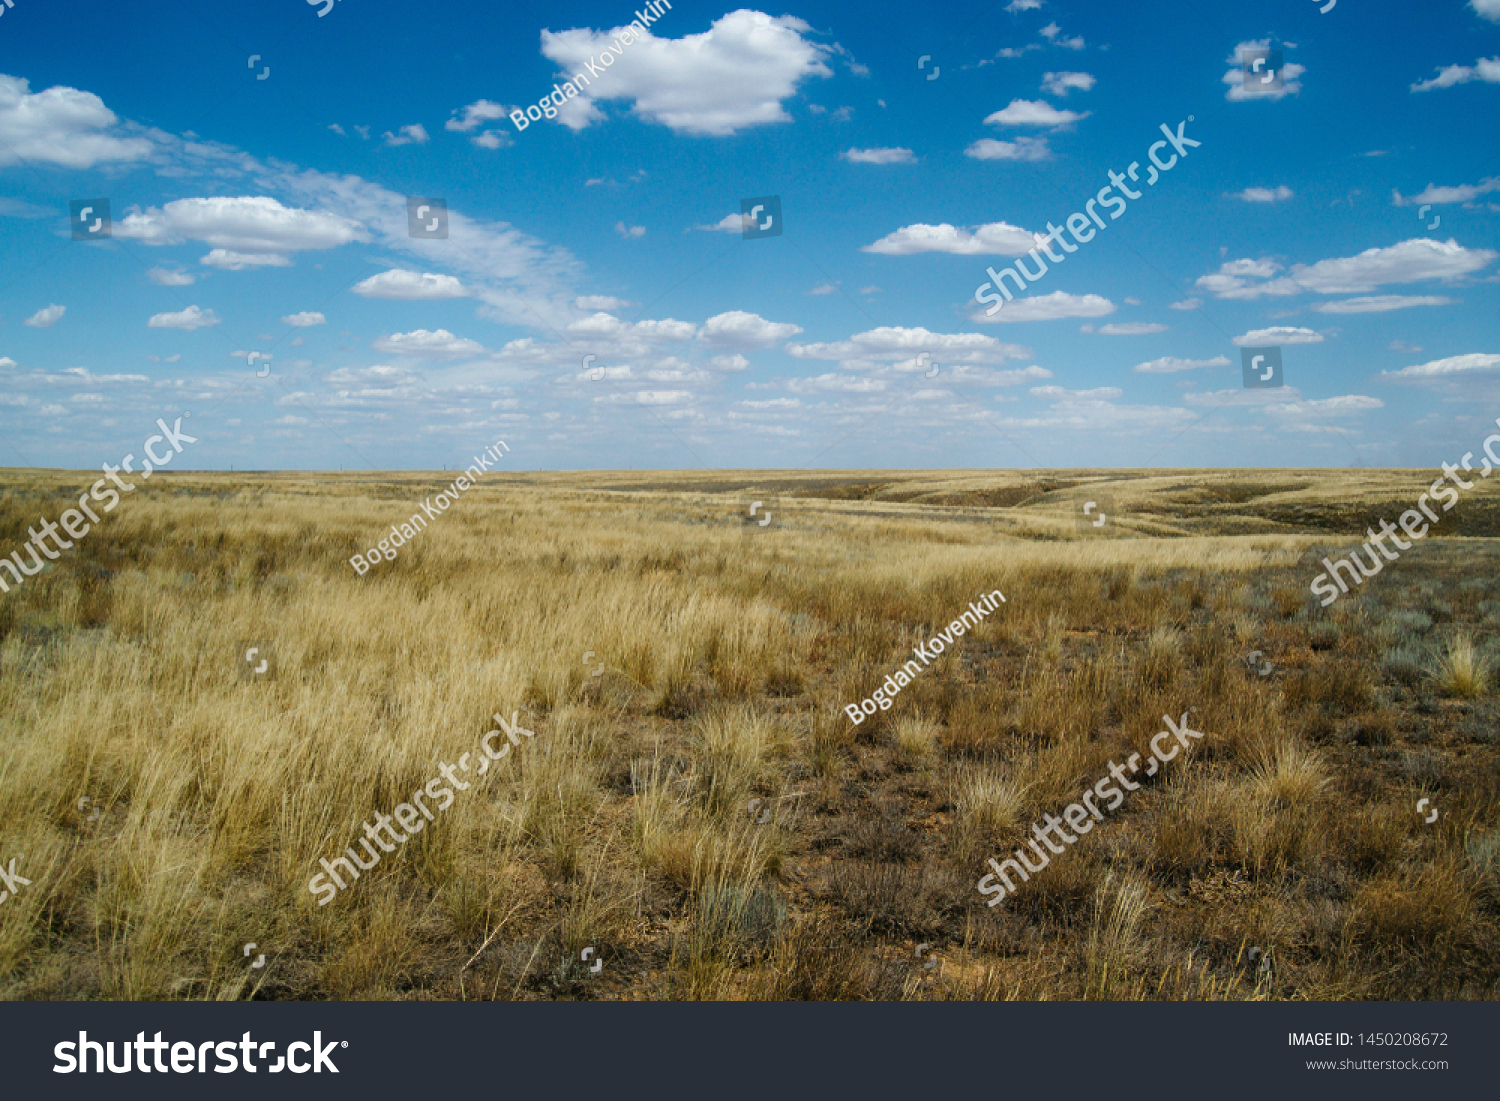 Steppe landscape. Lonely green plants on dry, hot sand.The steppe is woodless. Ravine in the steppe. #1450208672